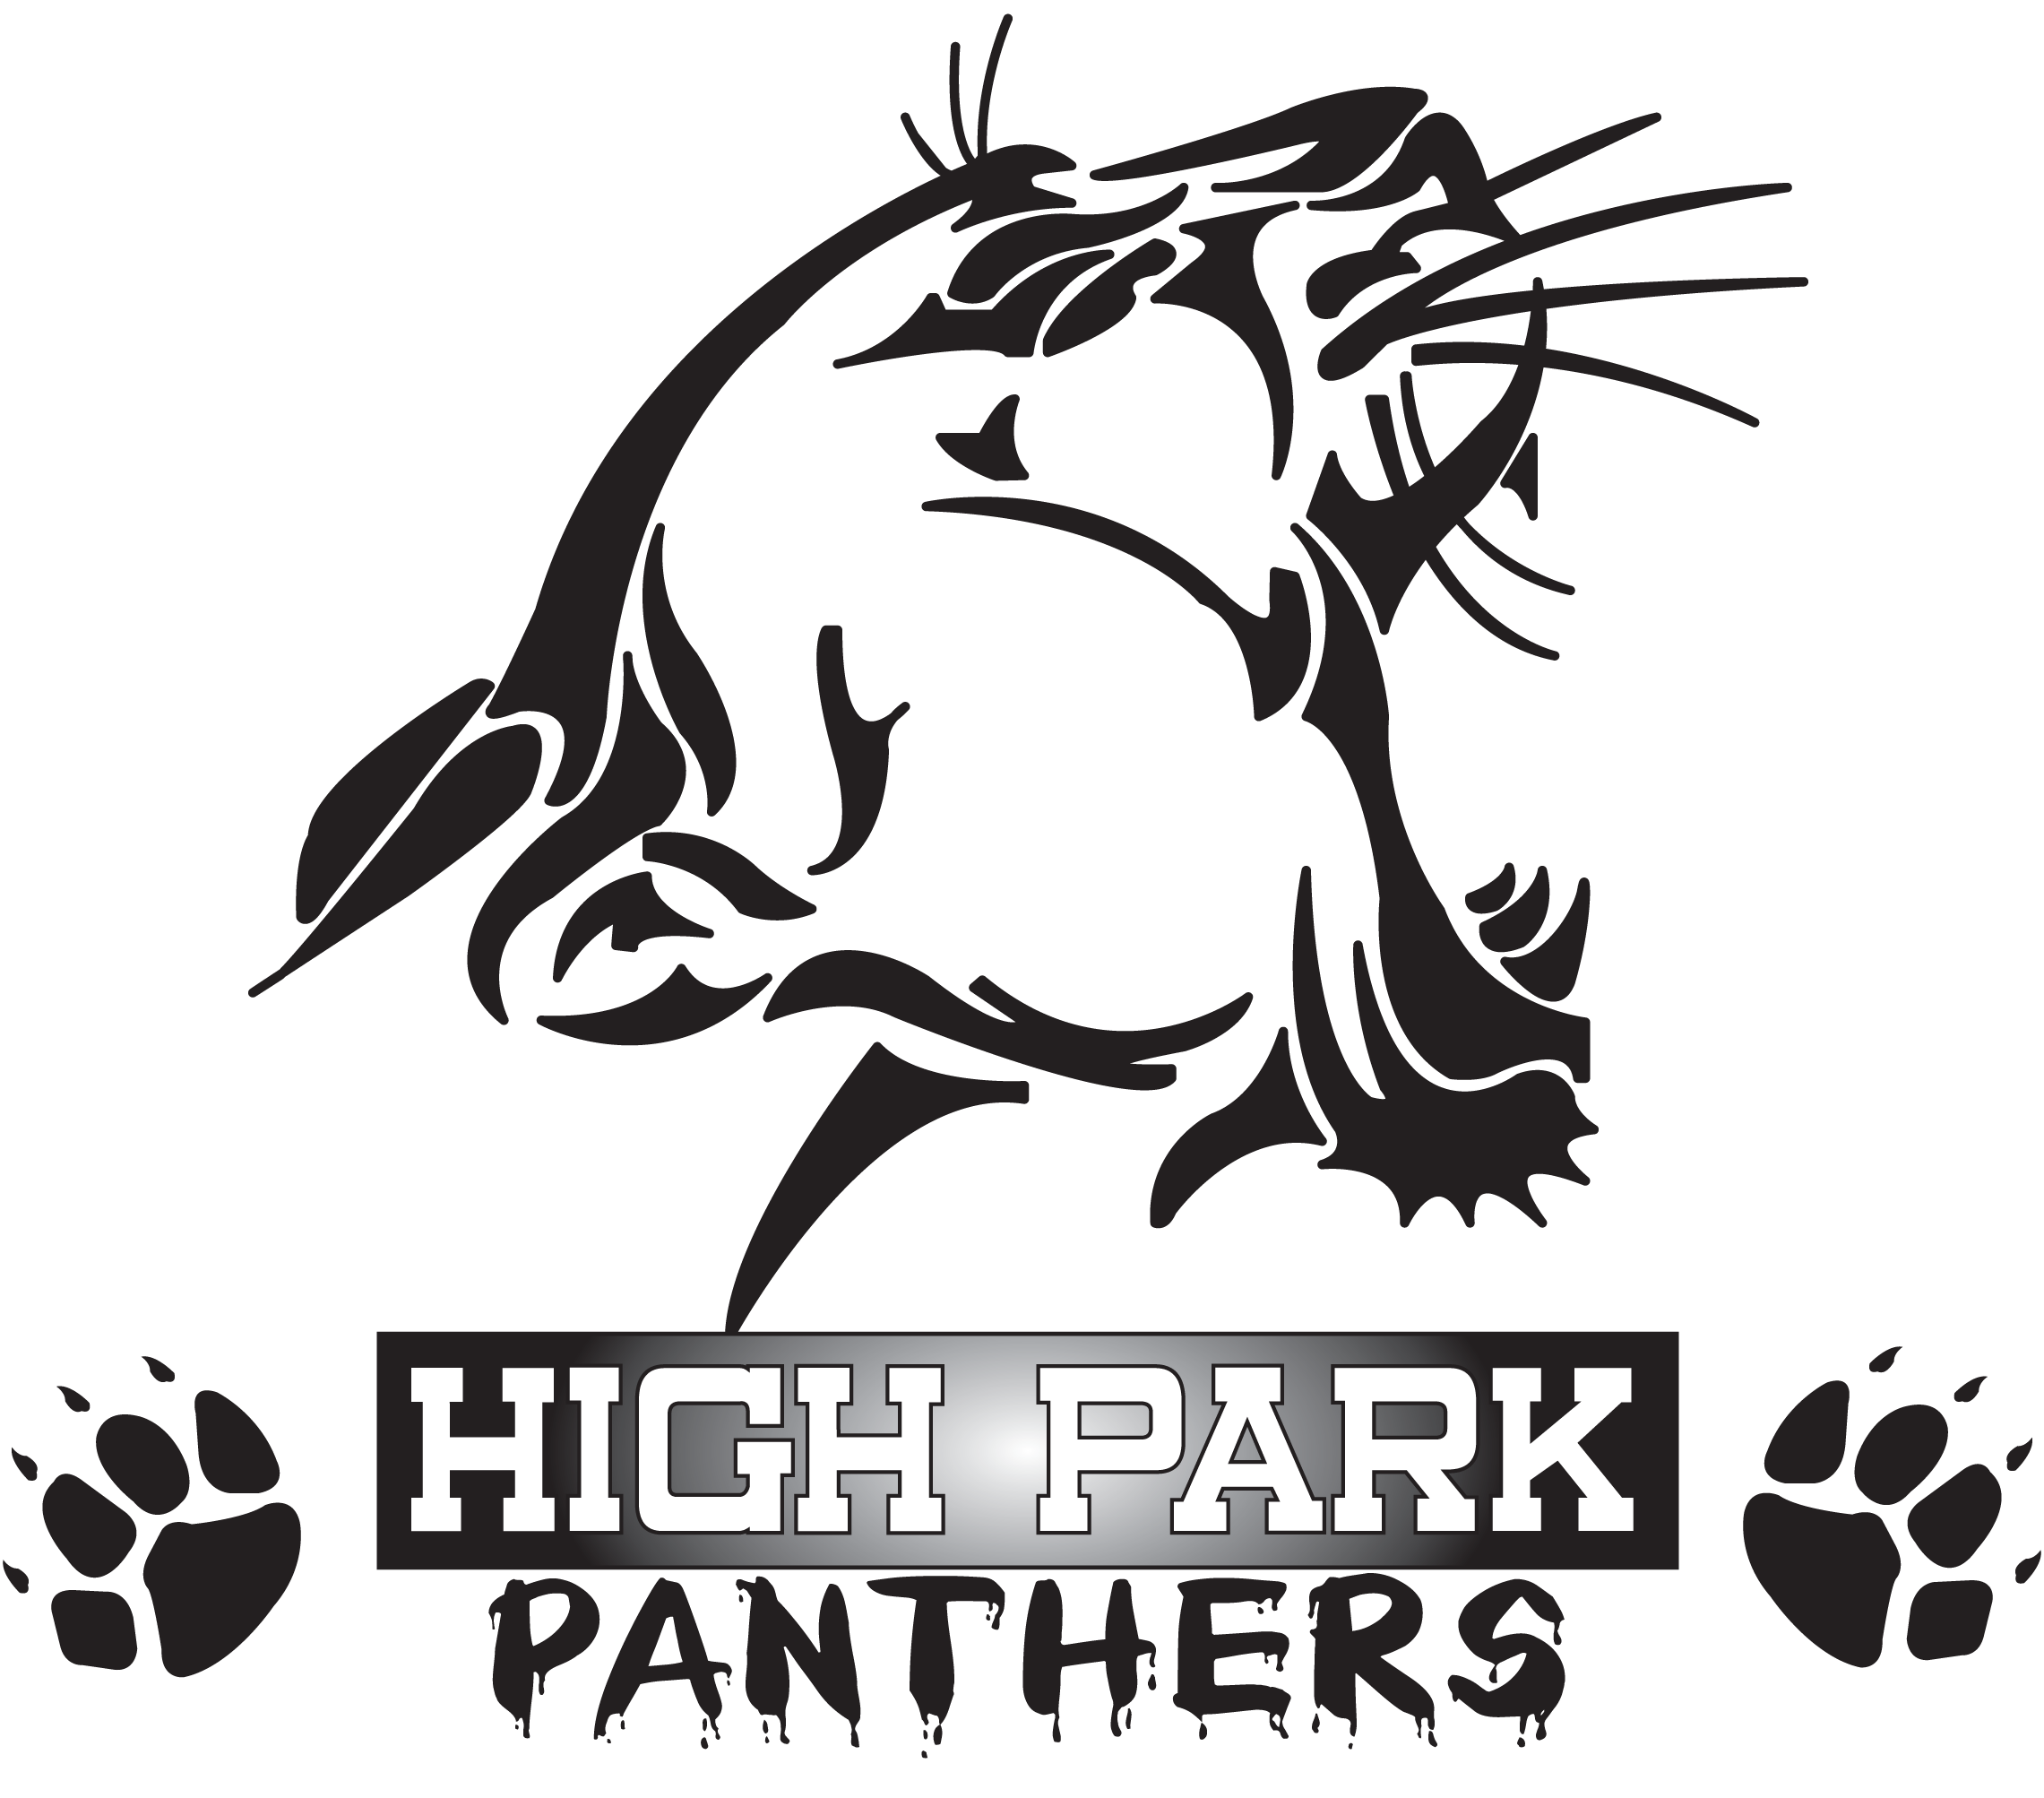 Welcome to High Park Public School!